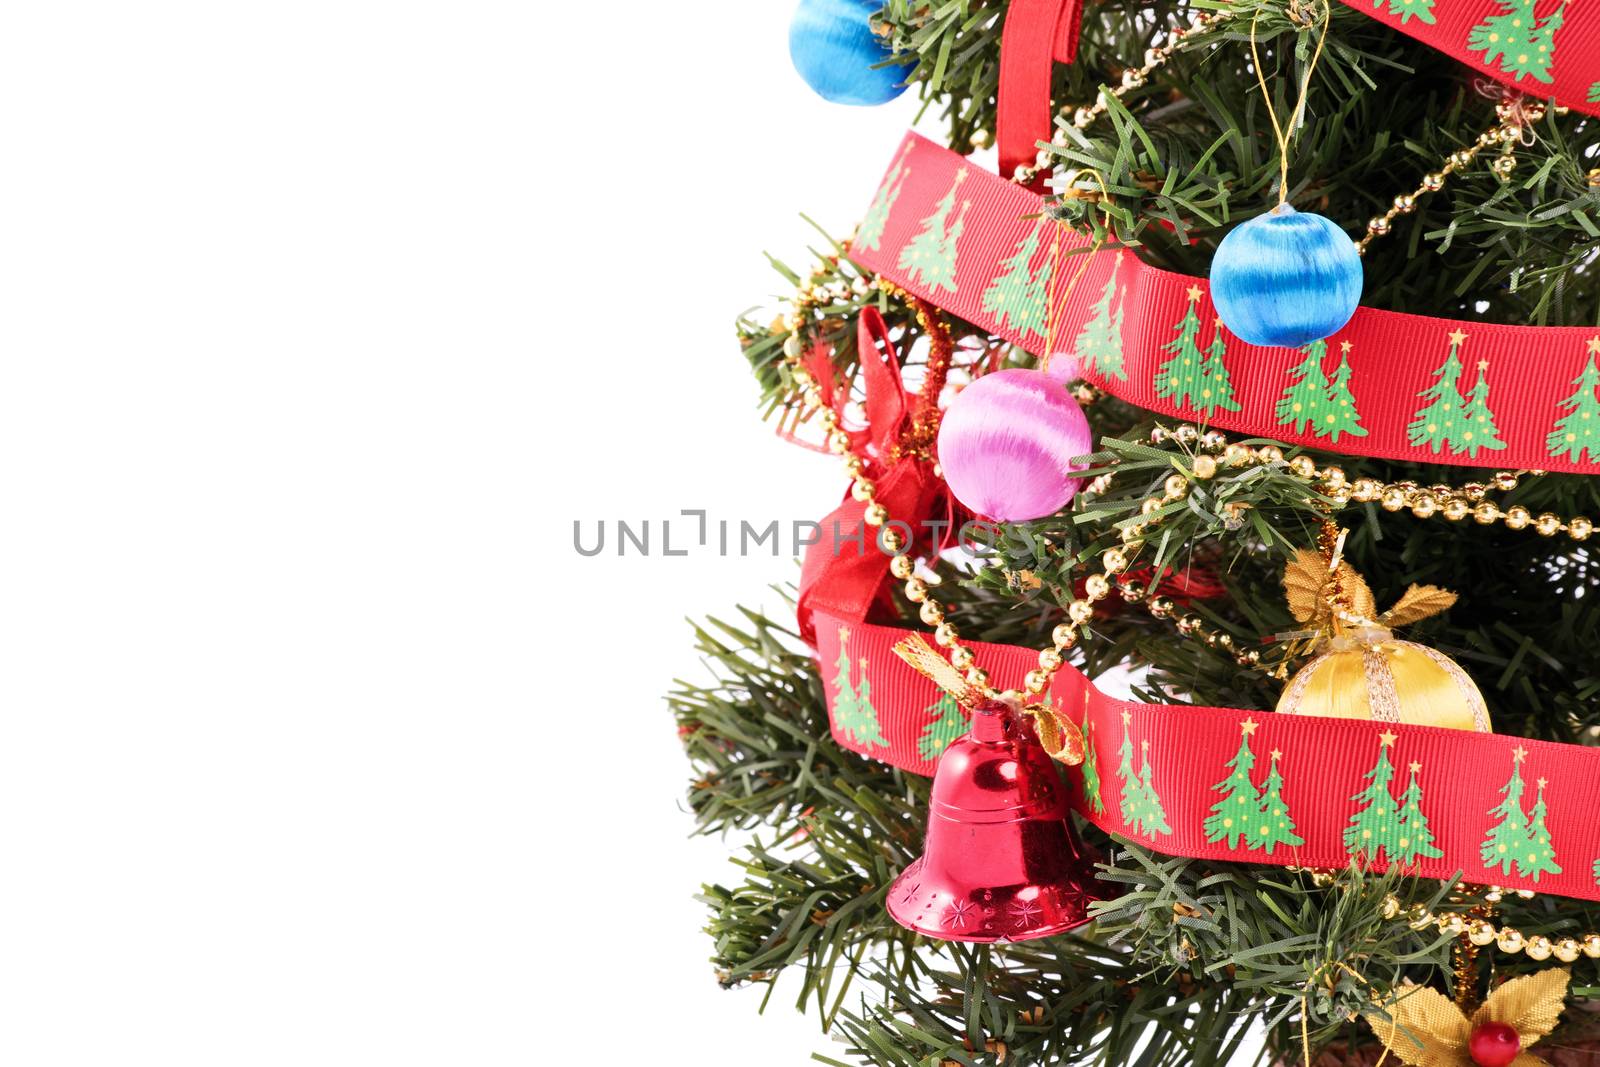 Ready for the holidays. Close up shot of a part of decorated Christmas tree, isolated on white background.